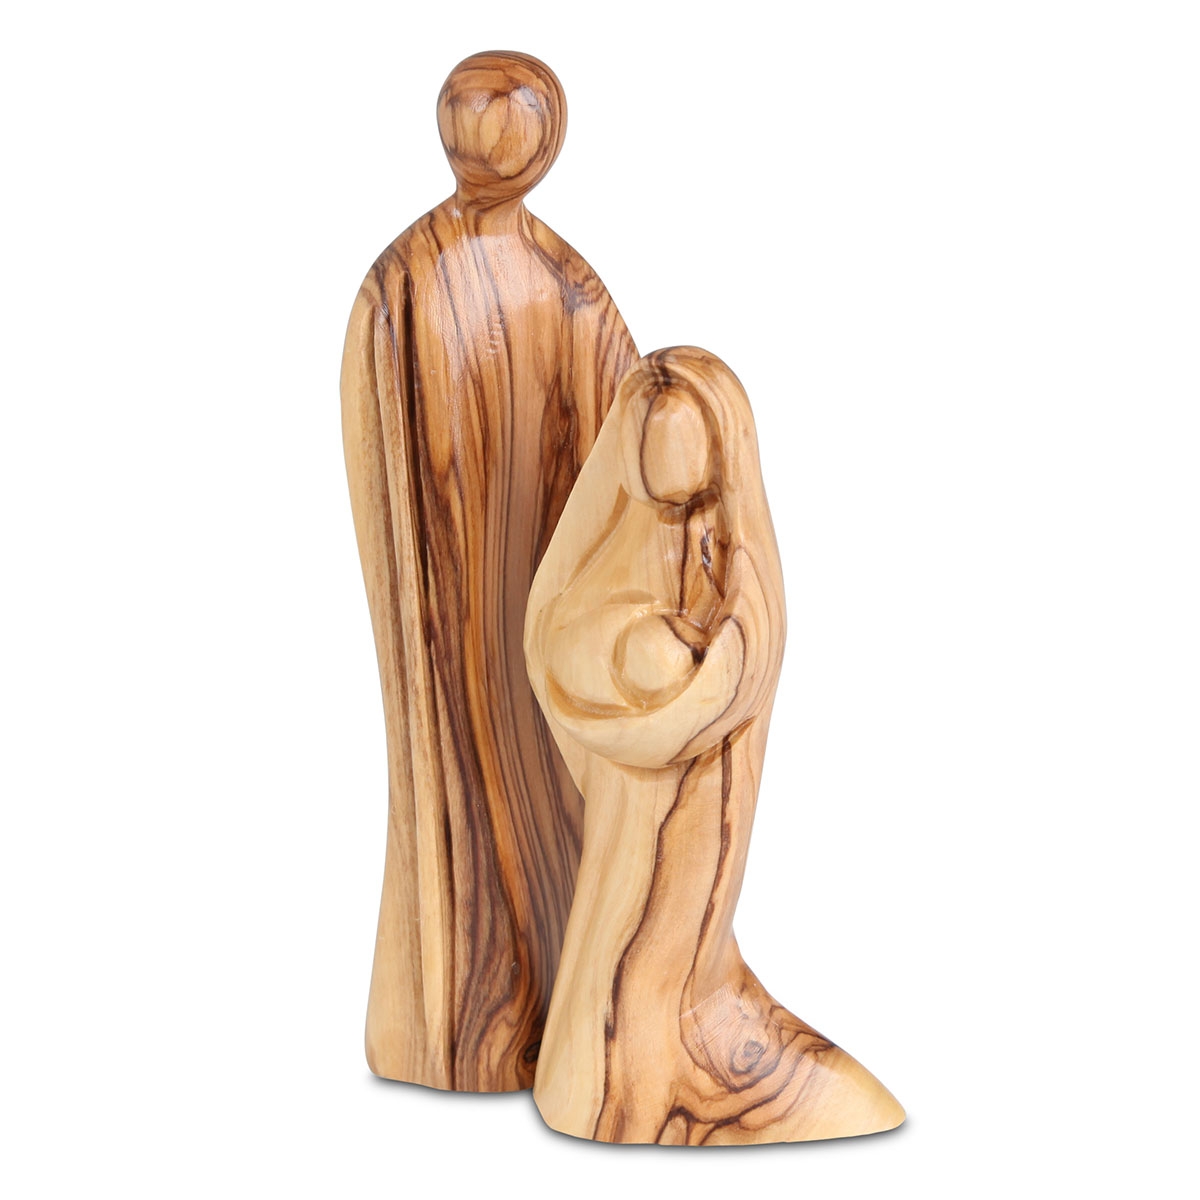 Olive Wood Holy Family Figurines - 2 Piece Set - 1